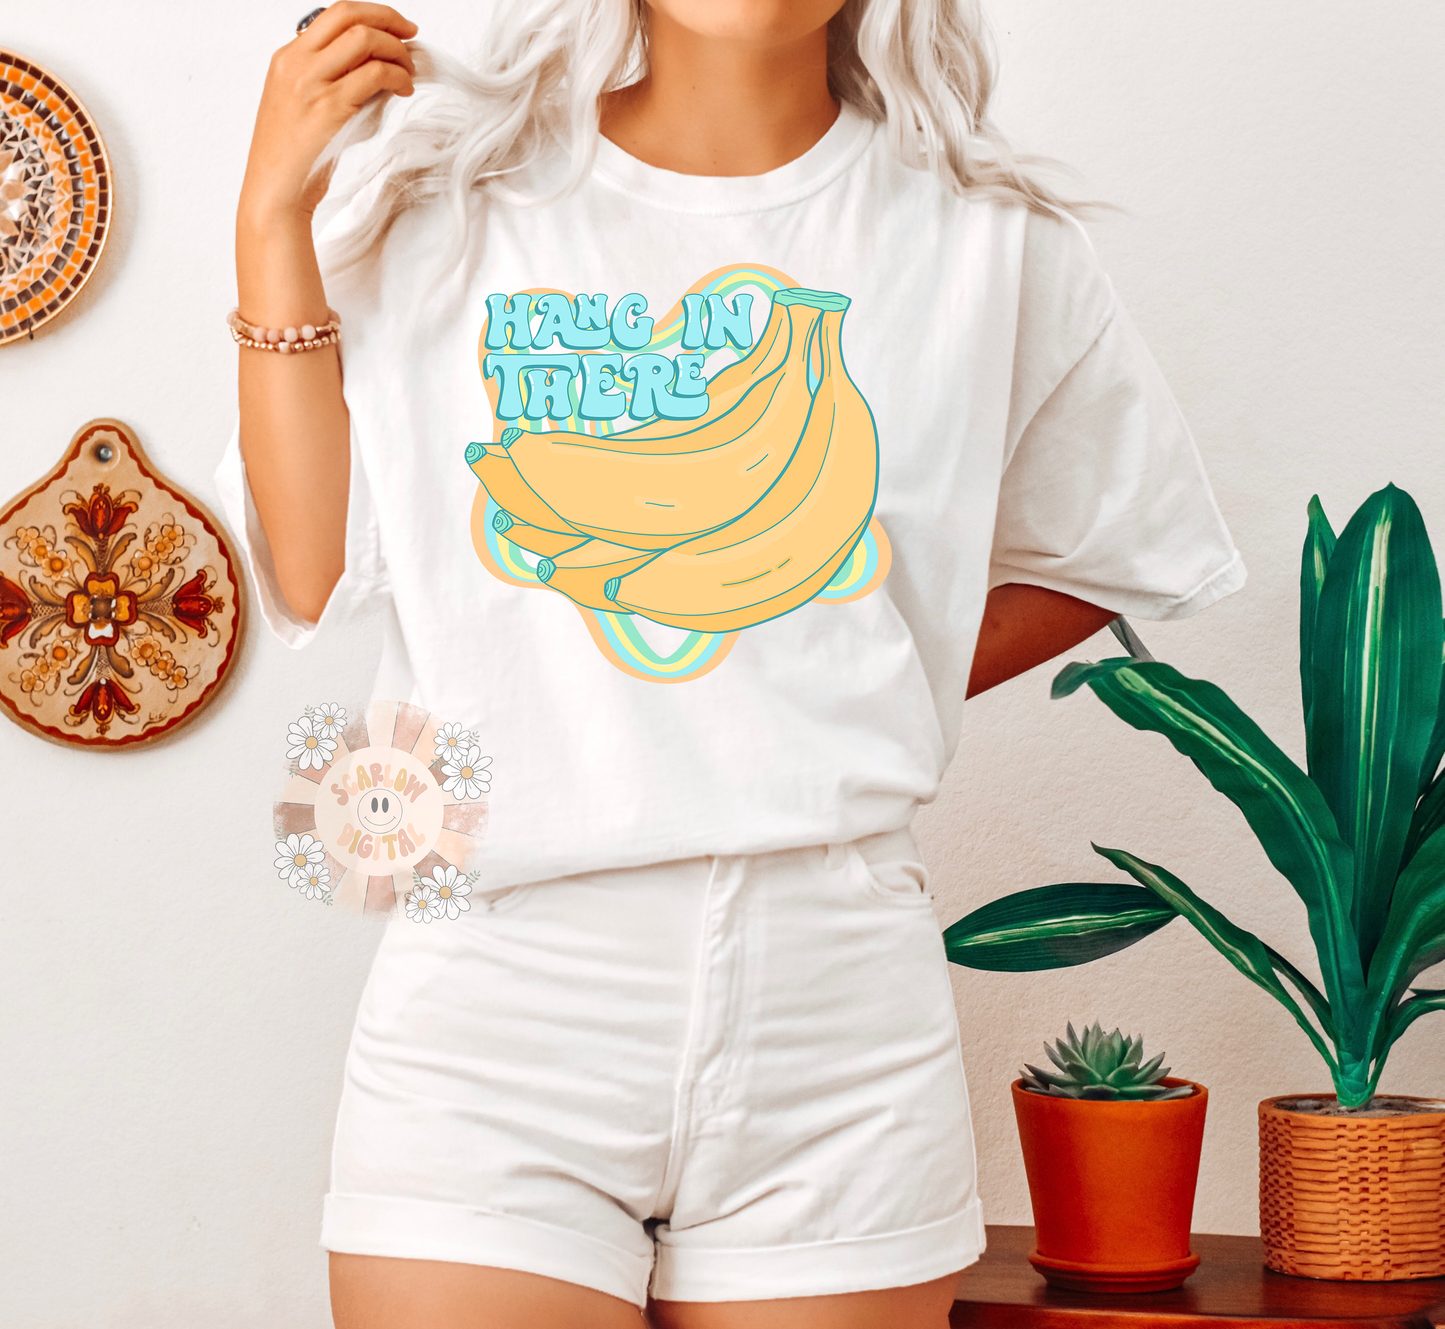 Hang in There PNG-Retro Sublimation Digital Design Download-colorful png, boy png, trendy png, bananas png, fruit puns png, funny png file